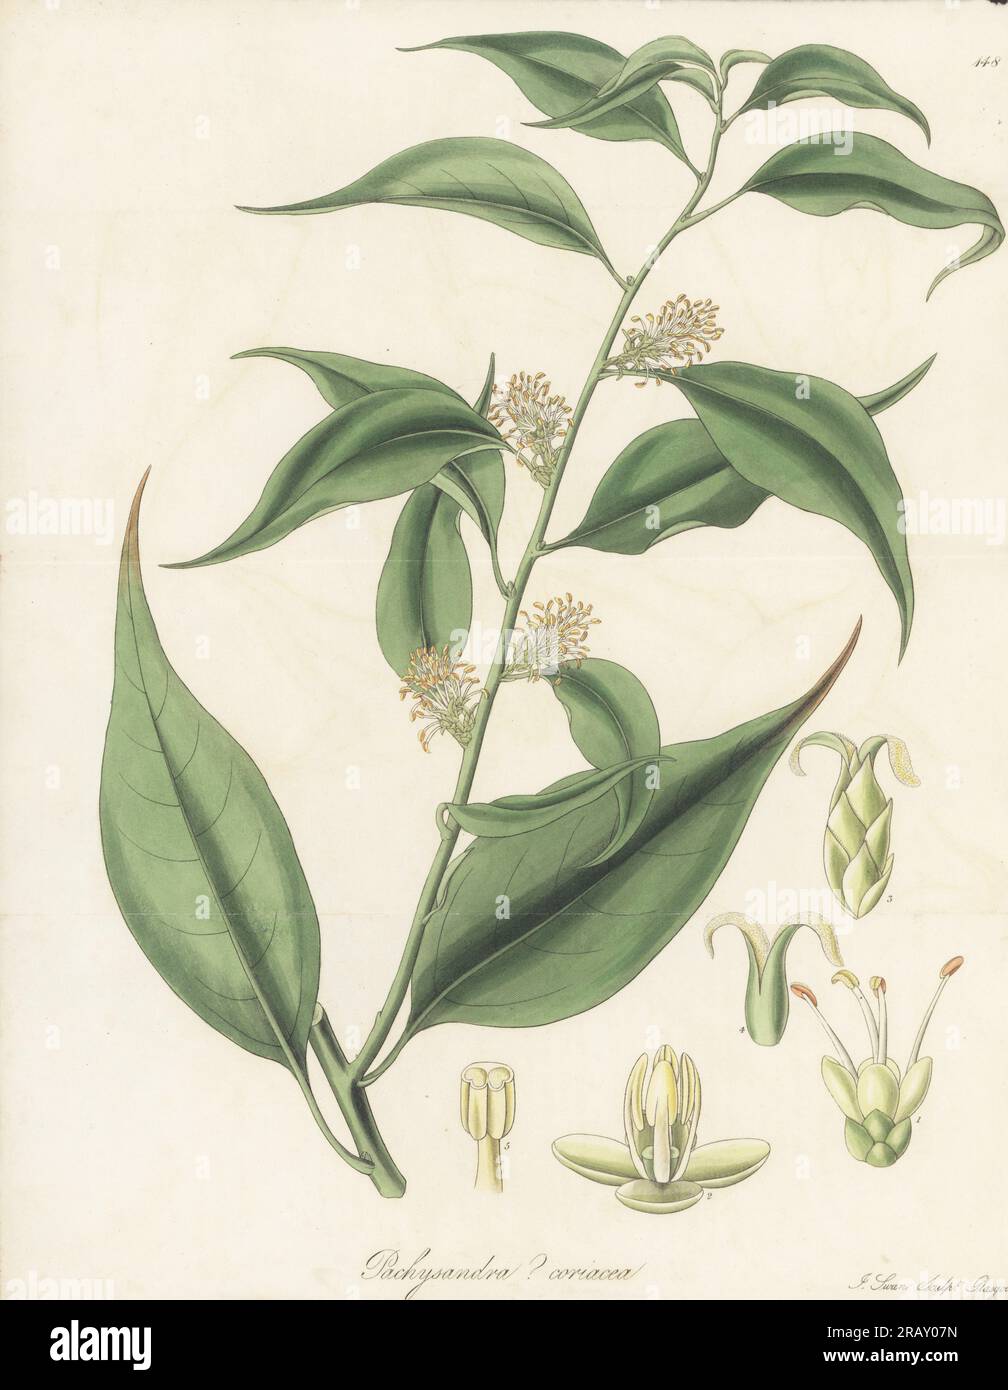 Sweet box or Christmas box, Sarcococca coriacea. Native to India, China and Indo-China, sent from Nepal by botanist Dr. Nathaniel Wallich. Nepaul pachysandra, Pachysandra? coriacea. Handcoloured copperplate engraving by Joseph Swan after a botanical illustration by William Jackson Hooker from his Exotic Flora, William Blackwood, Edinburgh, 1823-27. Stock Photo